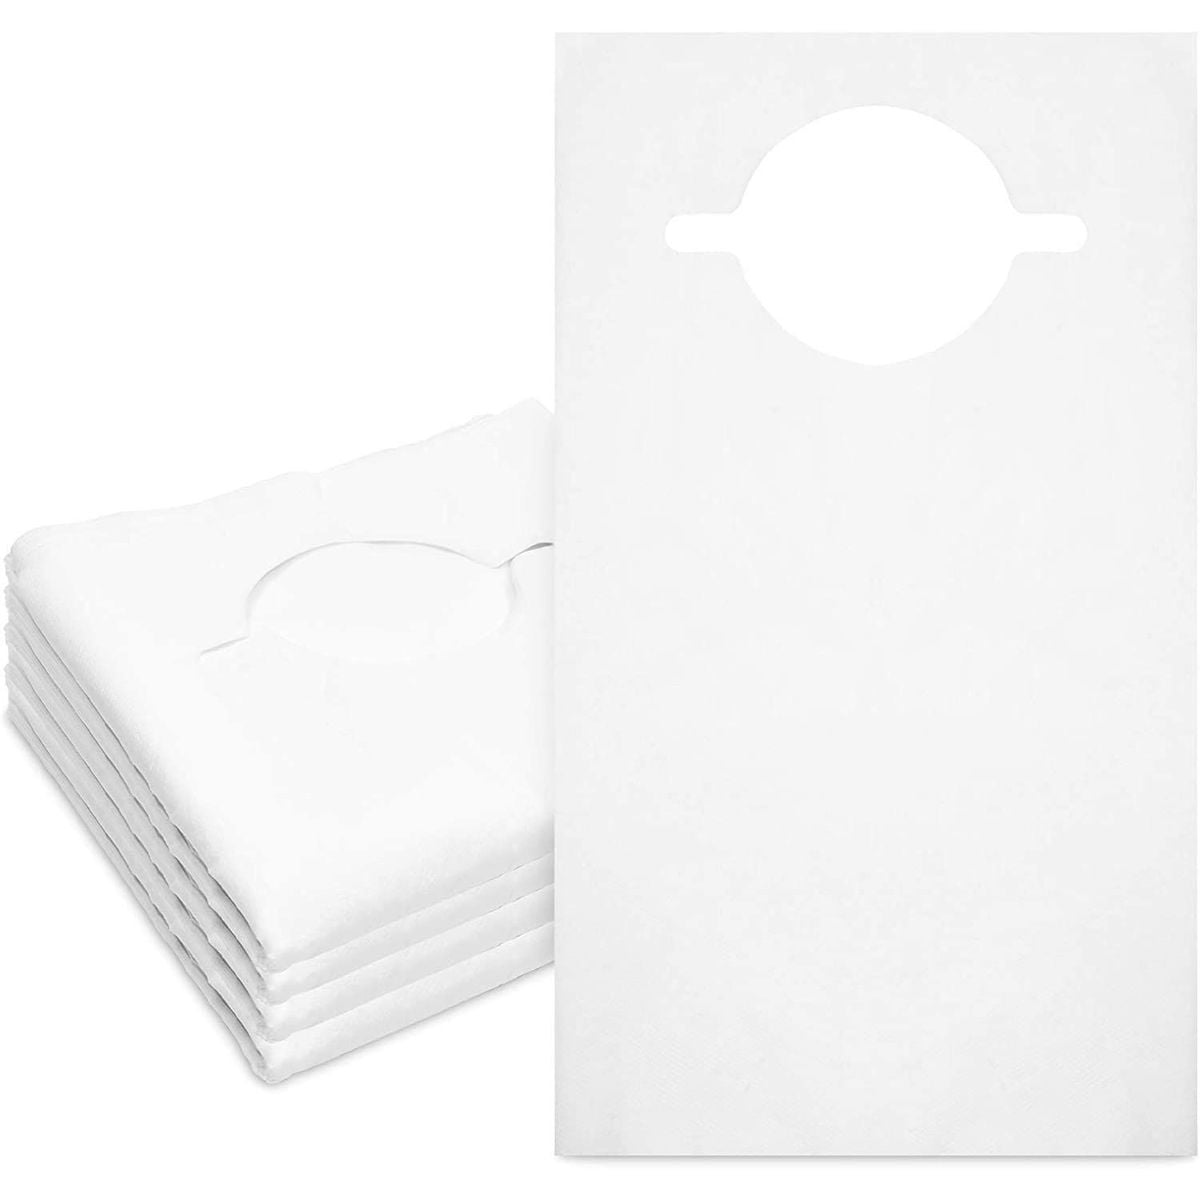 100 PACK OF DISPOSABLE ADULT BIBS WITH CRUMB CATCHER FREE SHIPPING 